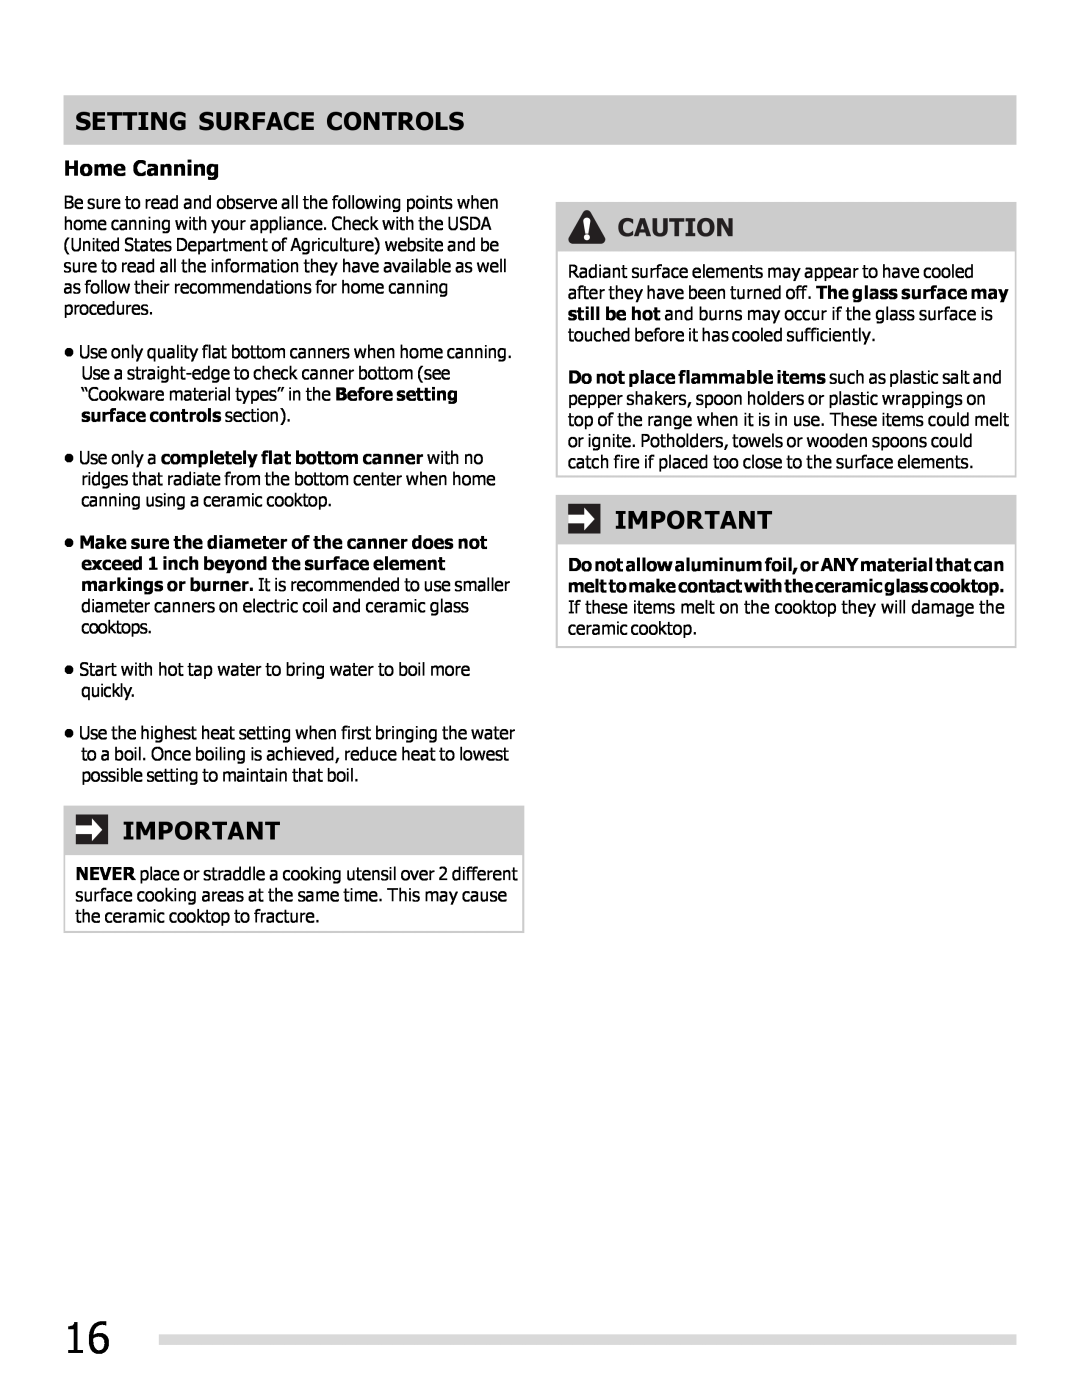 Frigidaire 316902202 important safety instructions Home Canning, Setting Surface Controls 